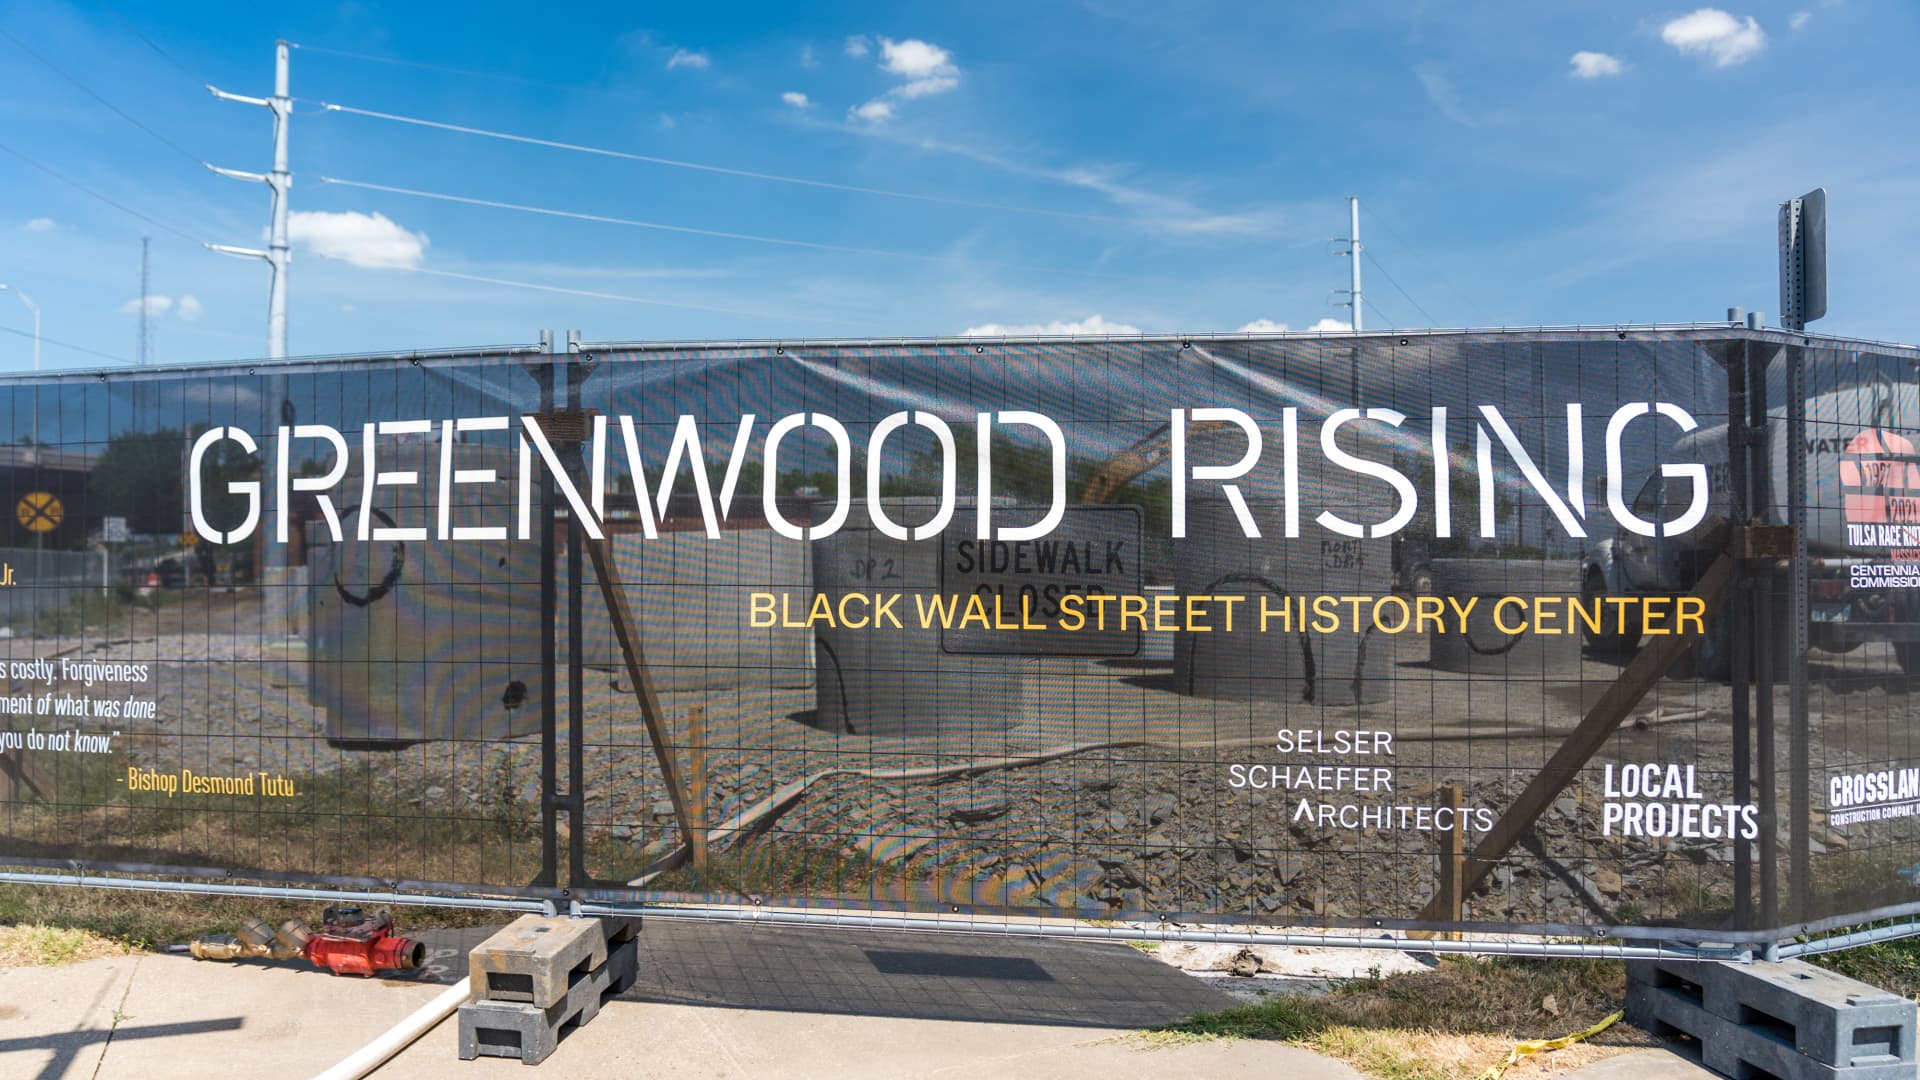 The Greenwood Rising Black Wall Street History Center stands under construction at North Greenwood Avenue in the Greenwood District of Tulsa Oklahoma, U.S., on Thursday, June 18, 2020.